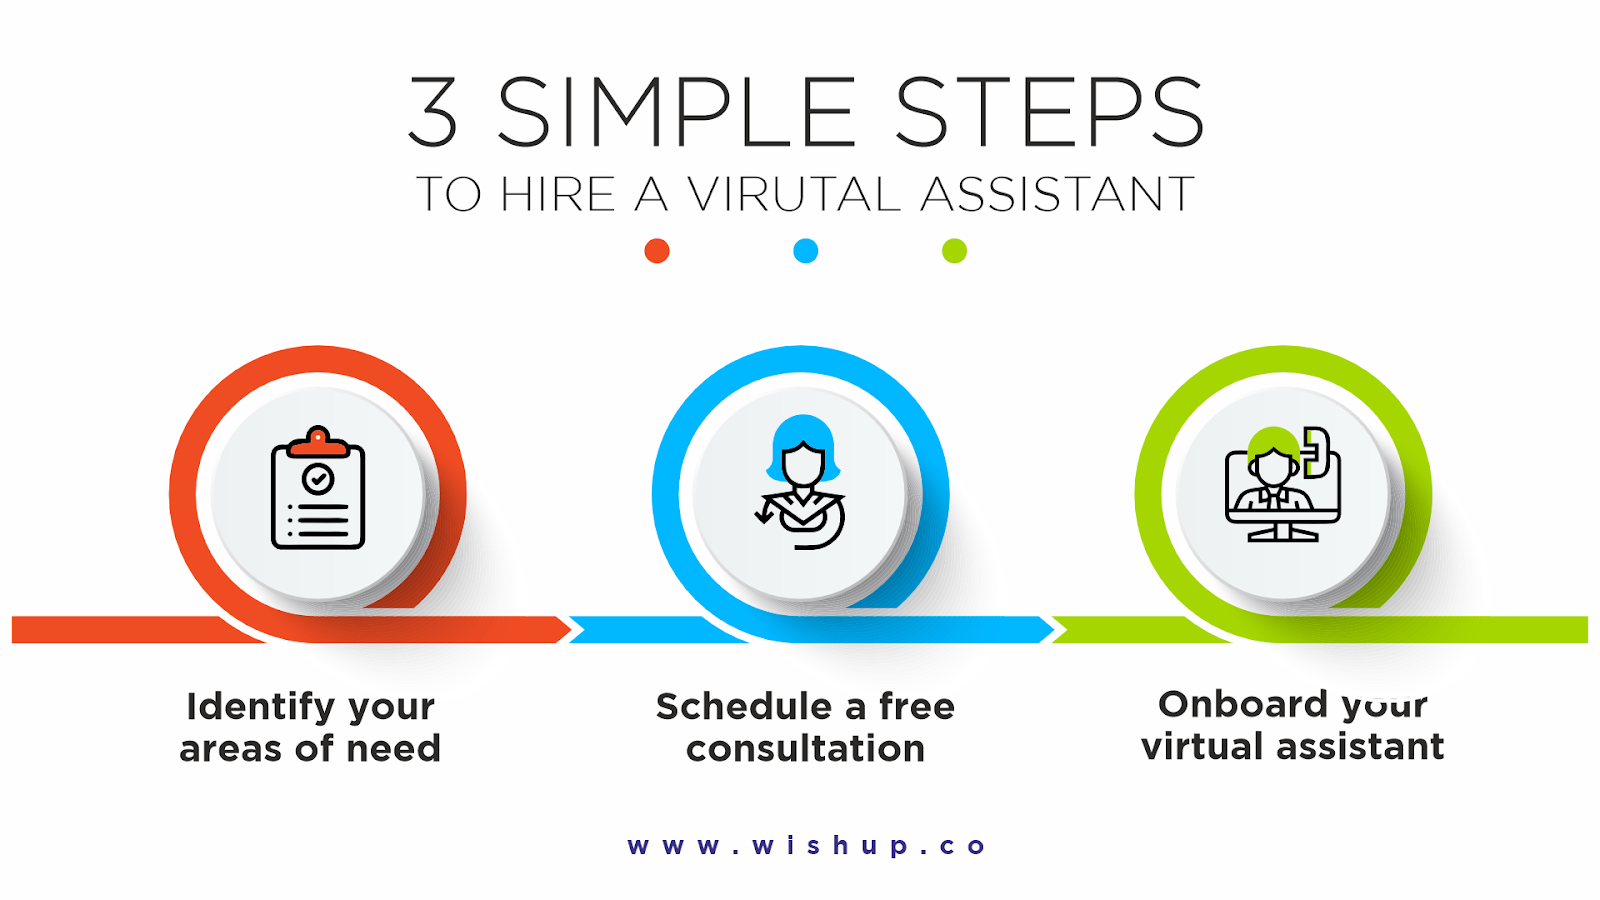 Hiring from Wishup.co is the easiest thing you will do today